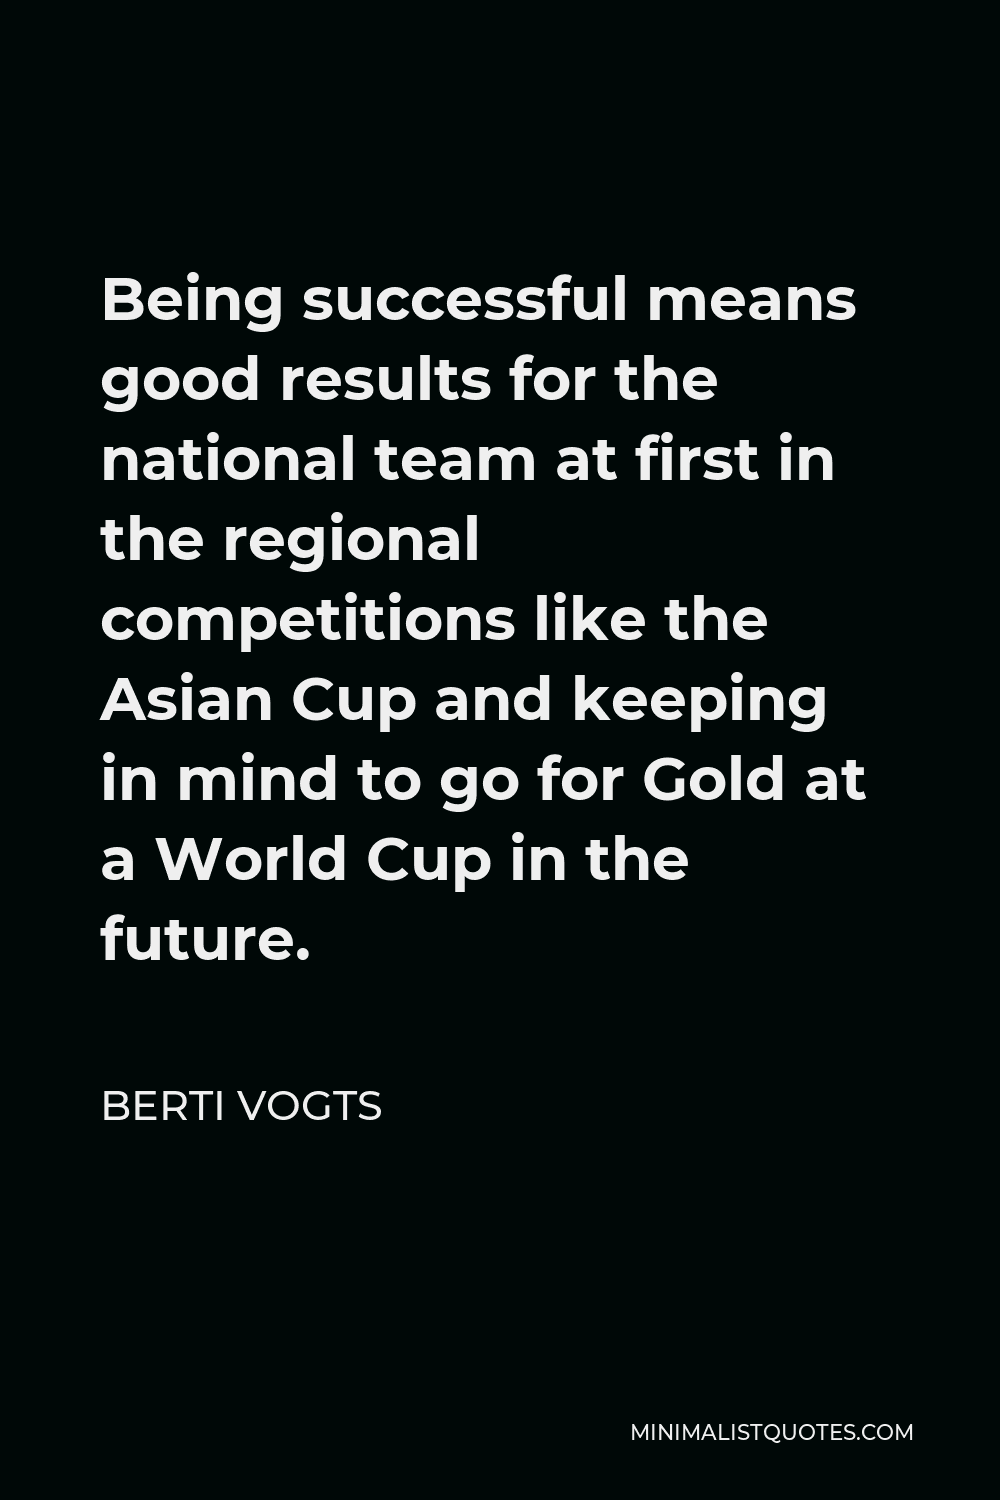 Berti Vogts Quote - Being successful means good results for the national team at first in the regional competitions like the Asian Cup and keeping in mind to go for Gold at a World Cup in the future.